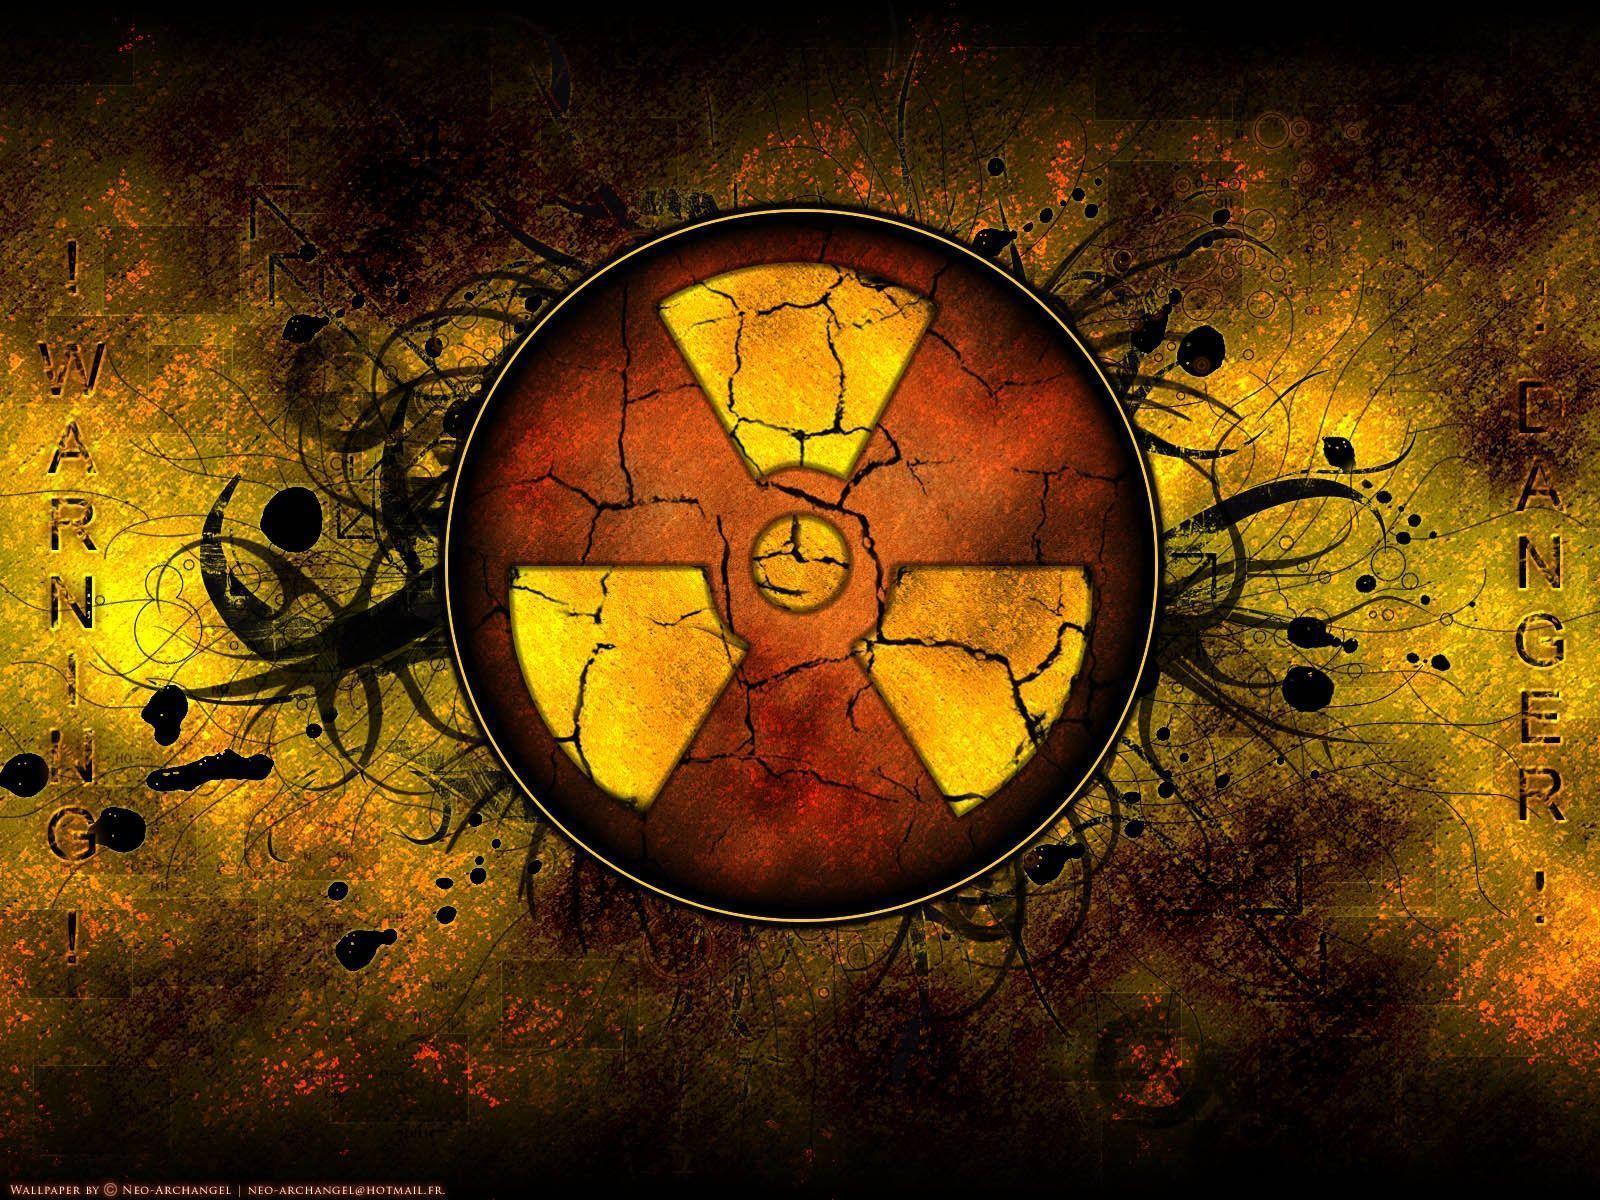 Radiation Wallpapers